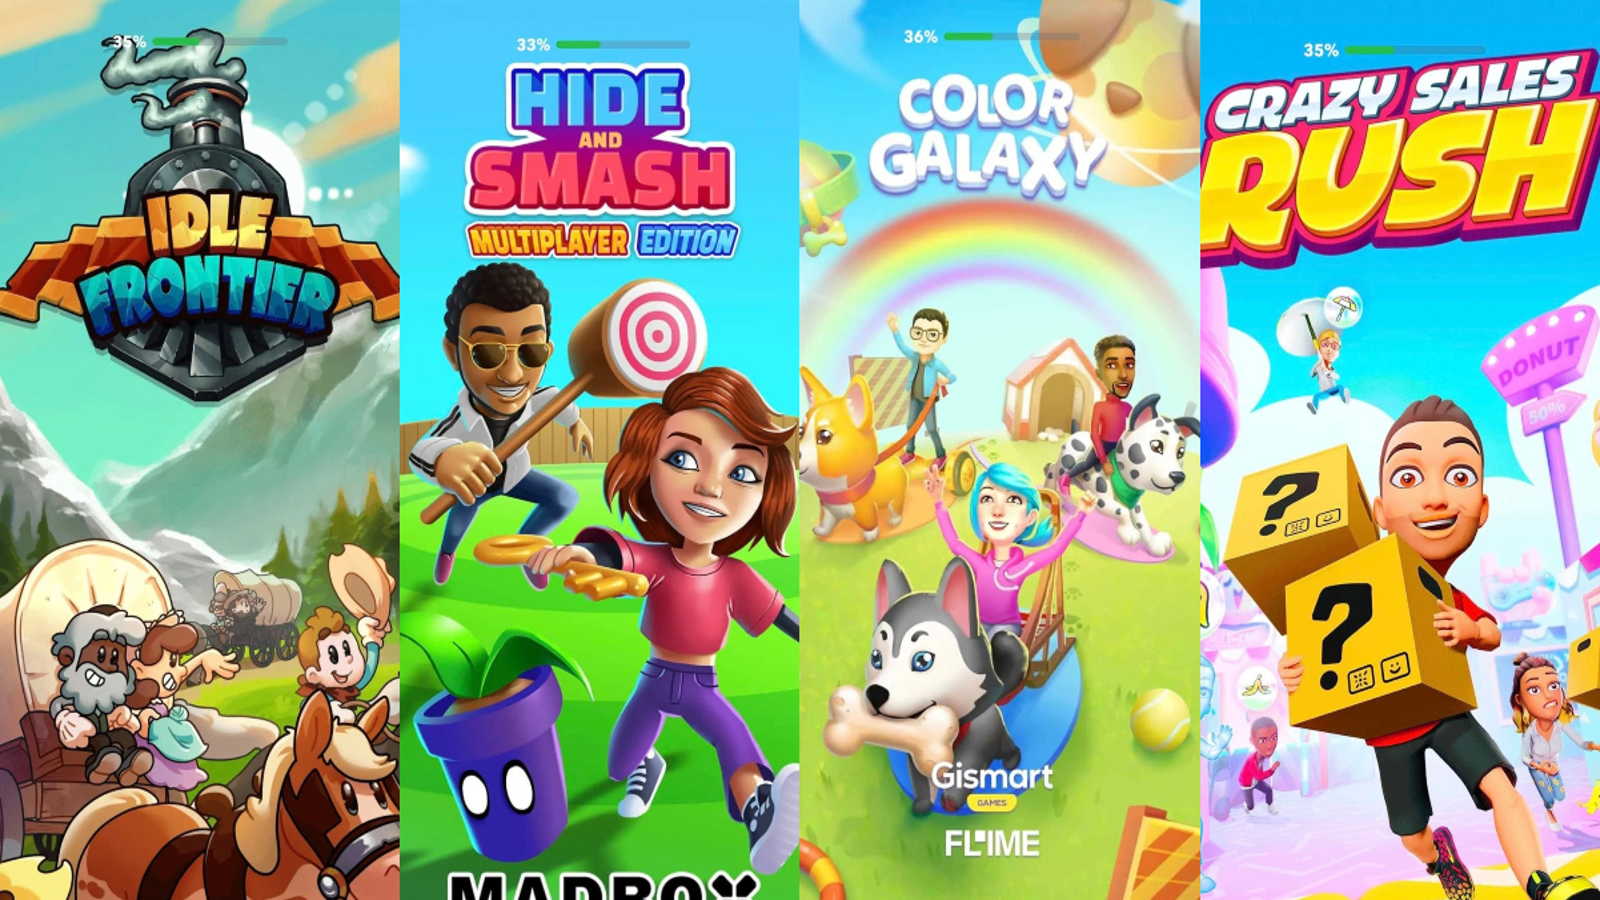 Gismart and Snapchat have made a multi-game partnership to